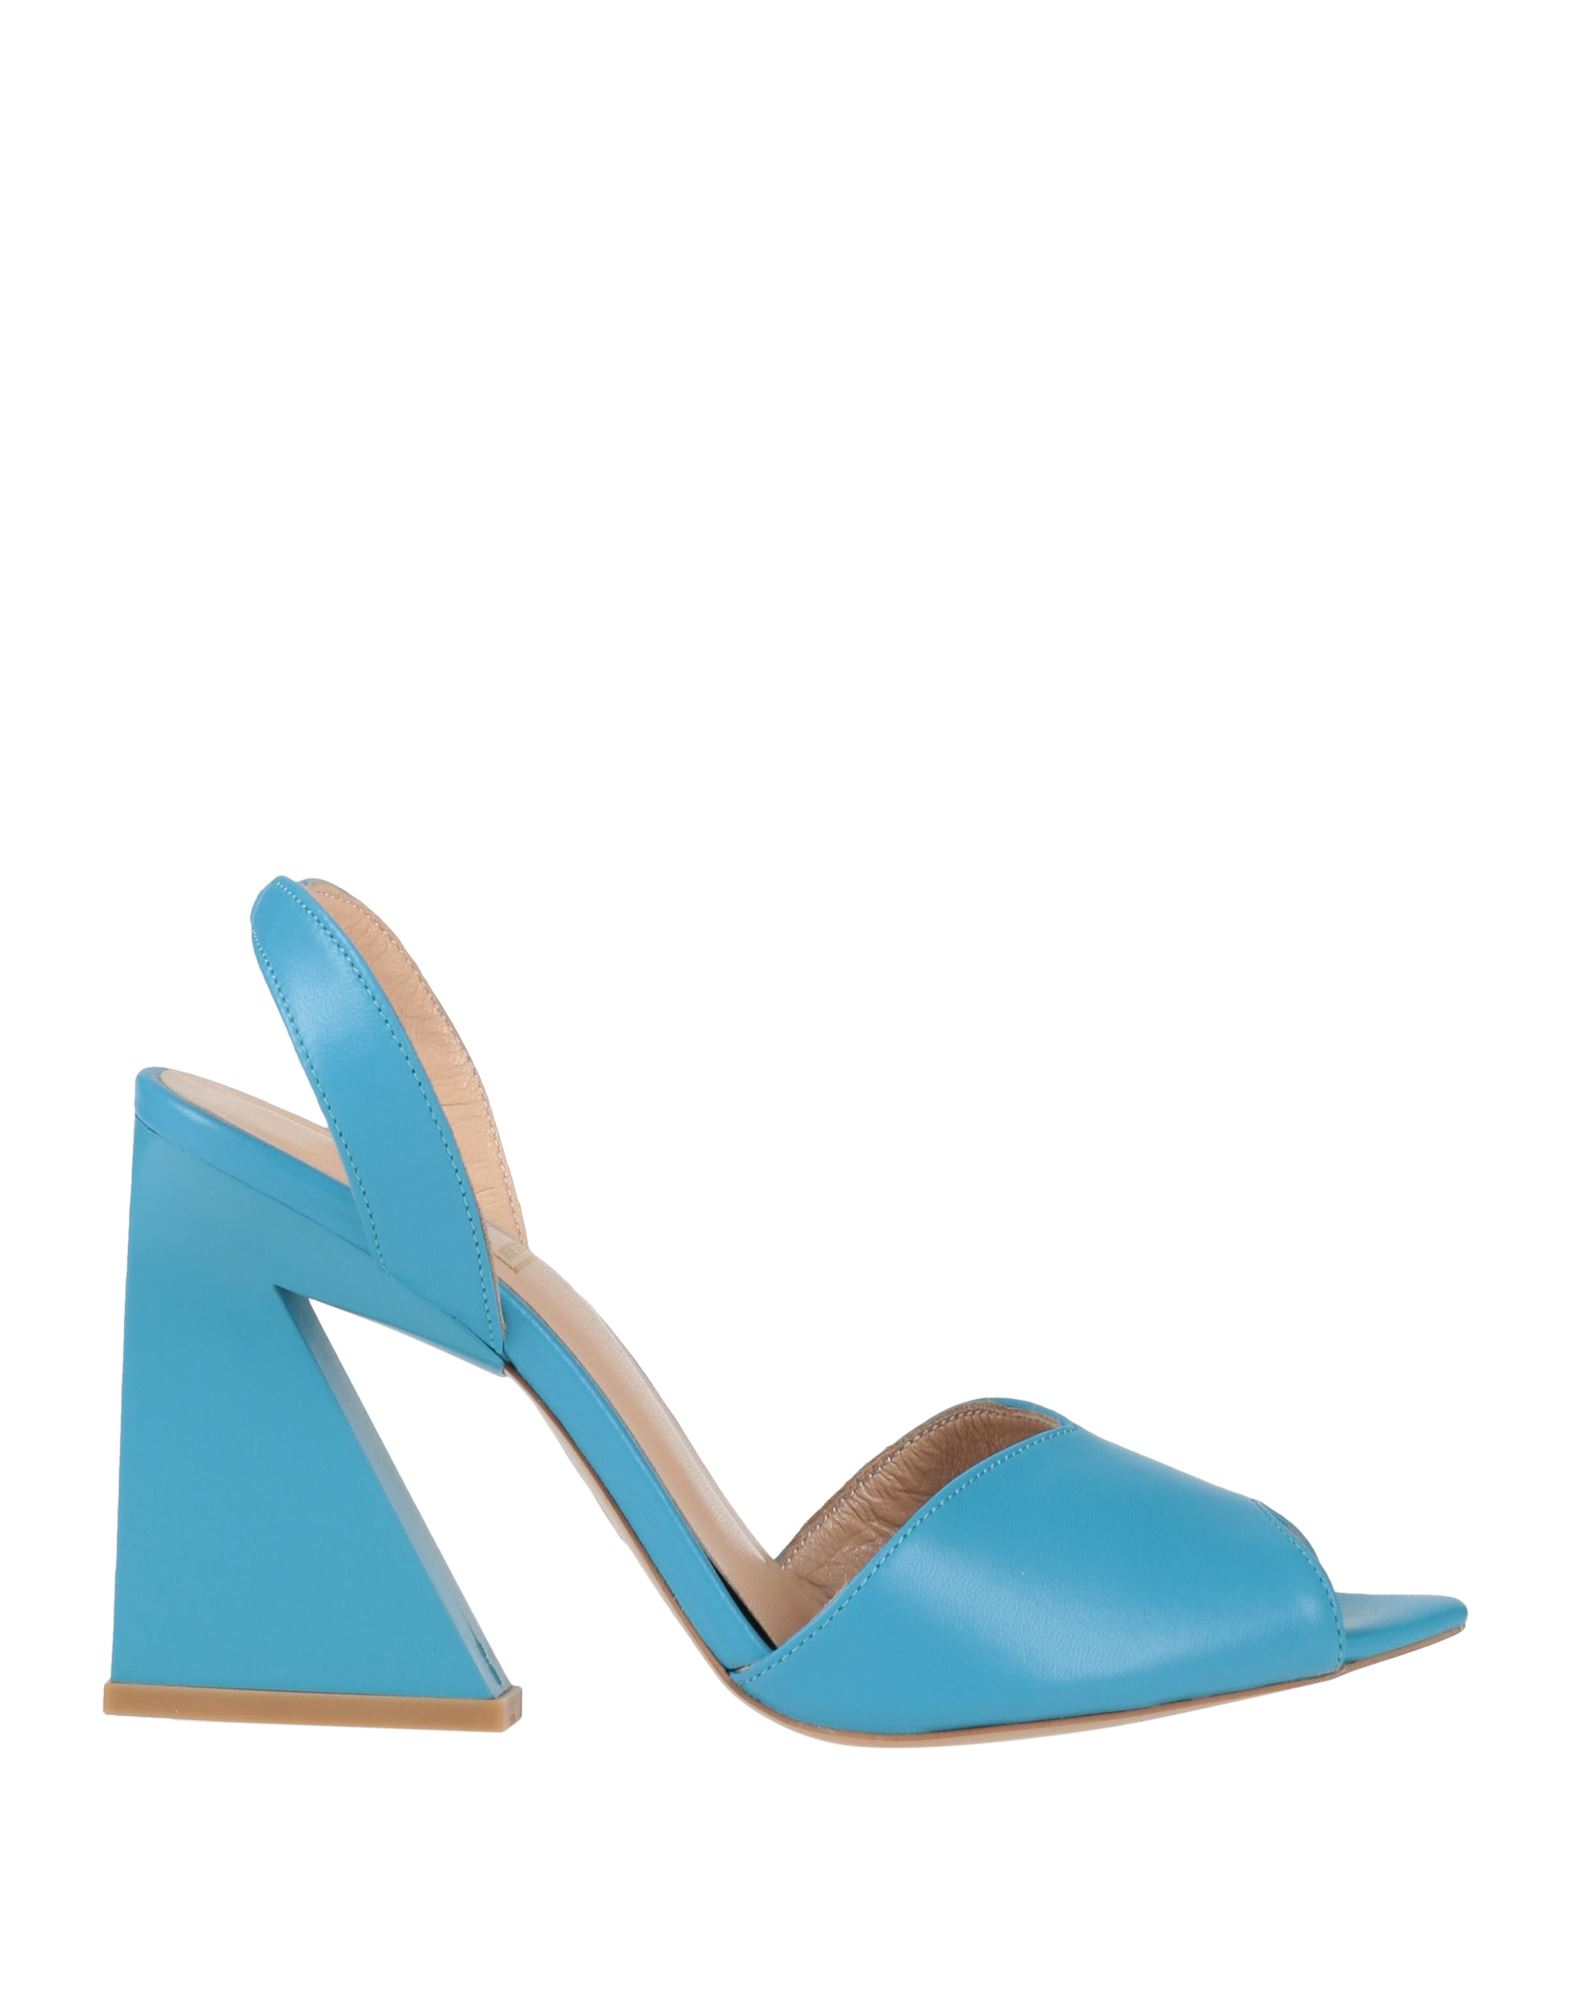 Nora New York Sandals In Blue